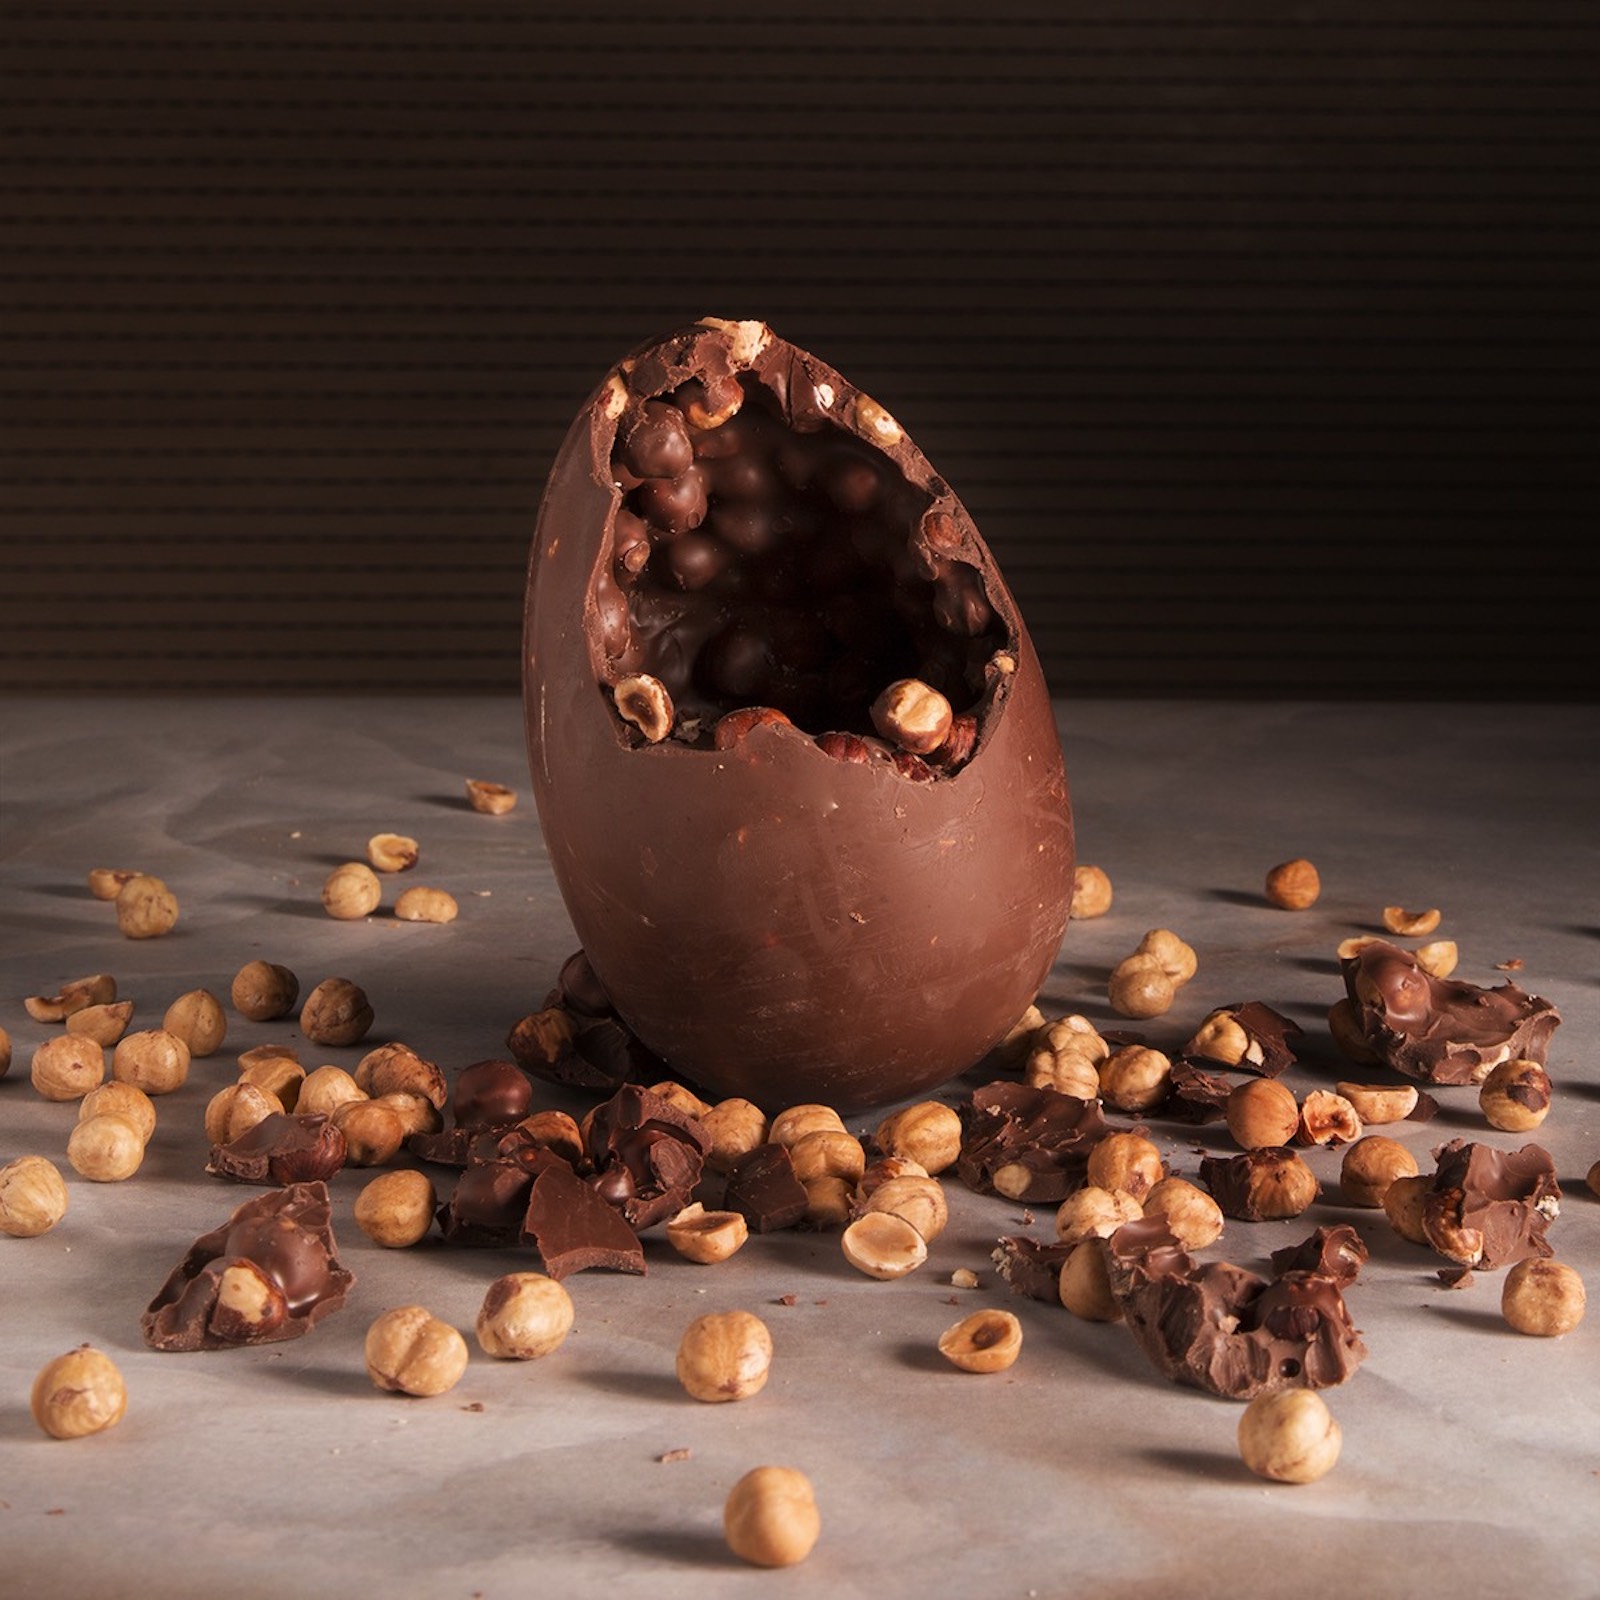 Eggs for adults, when the surprise is chocolate